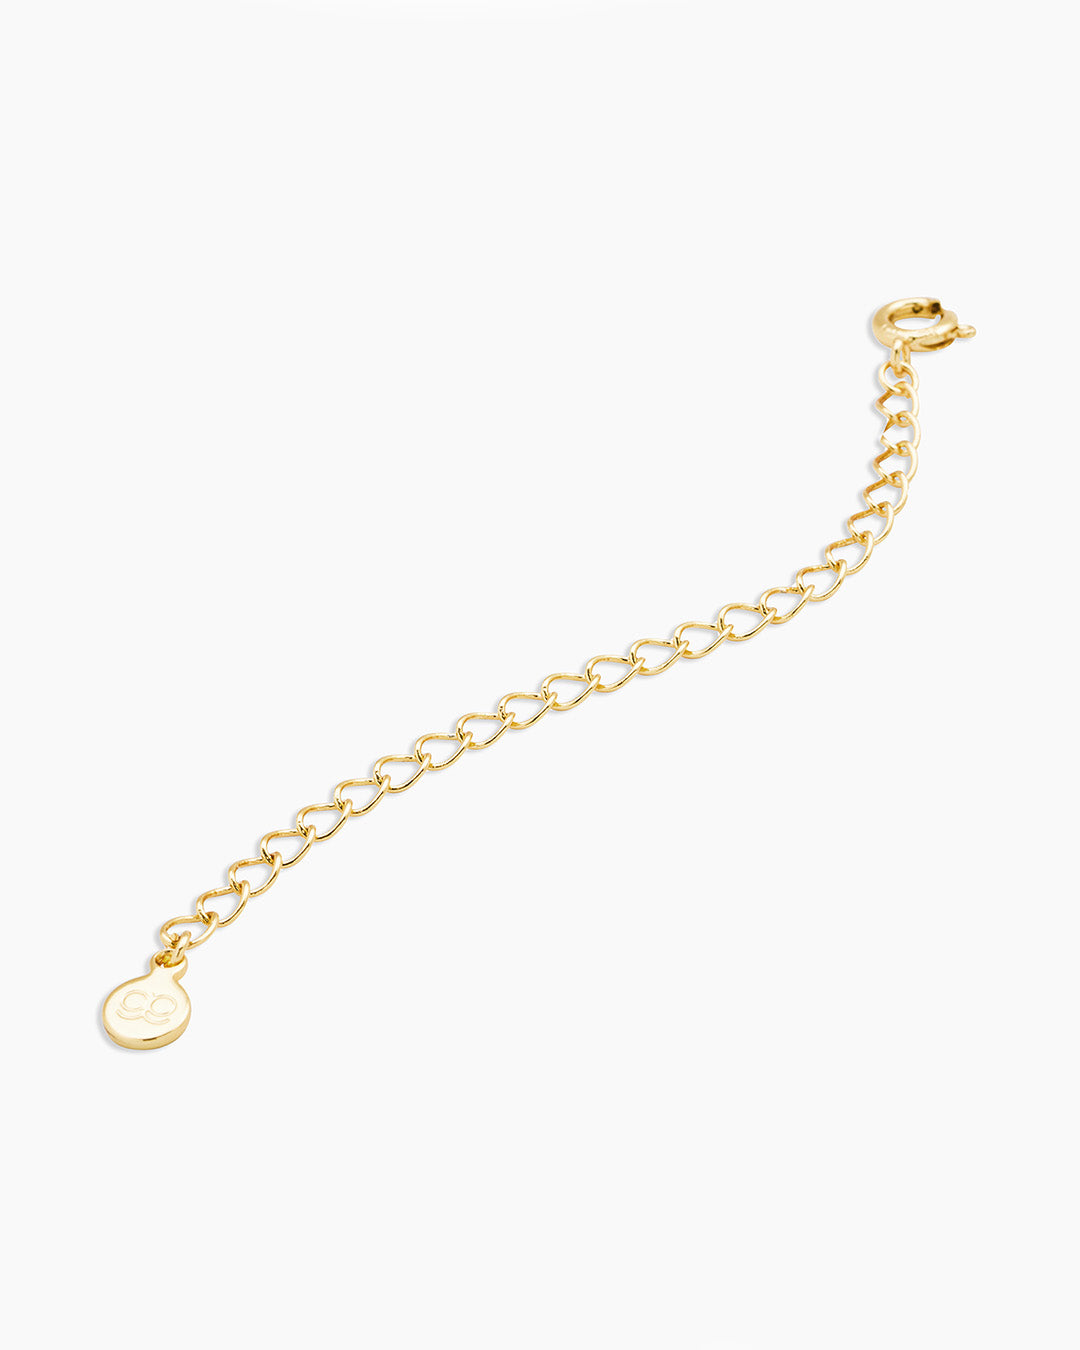 Necklace Extenders, Gold Plated Chain Extenders for Necklaces